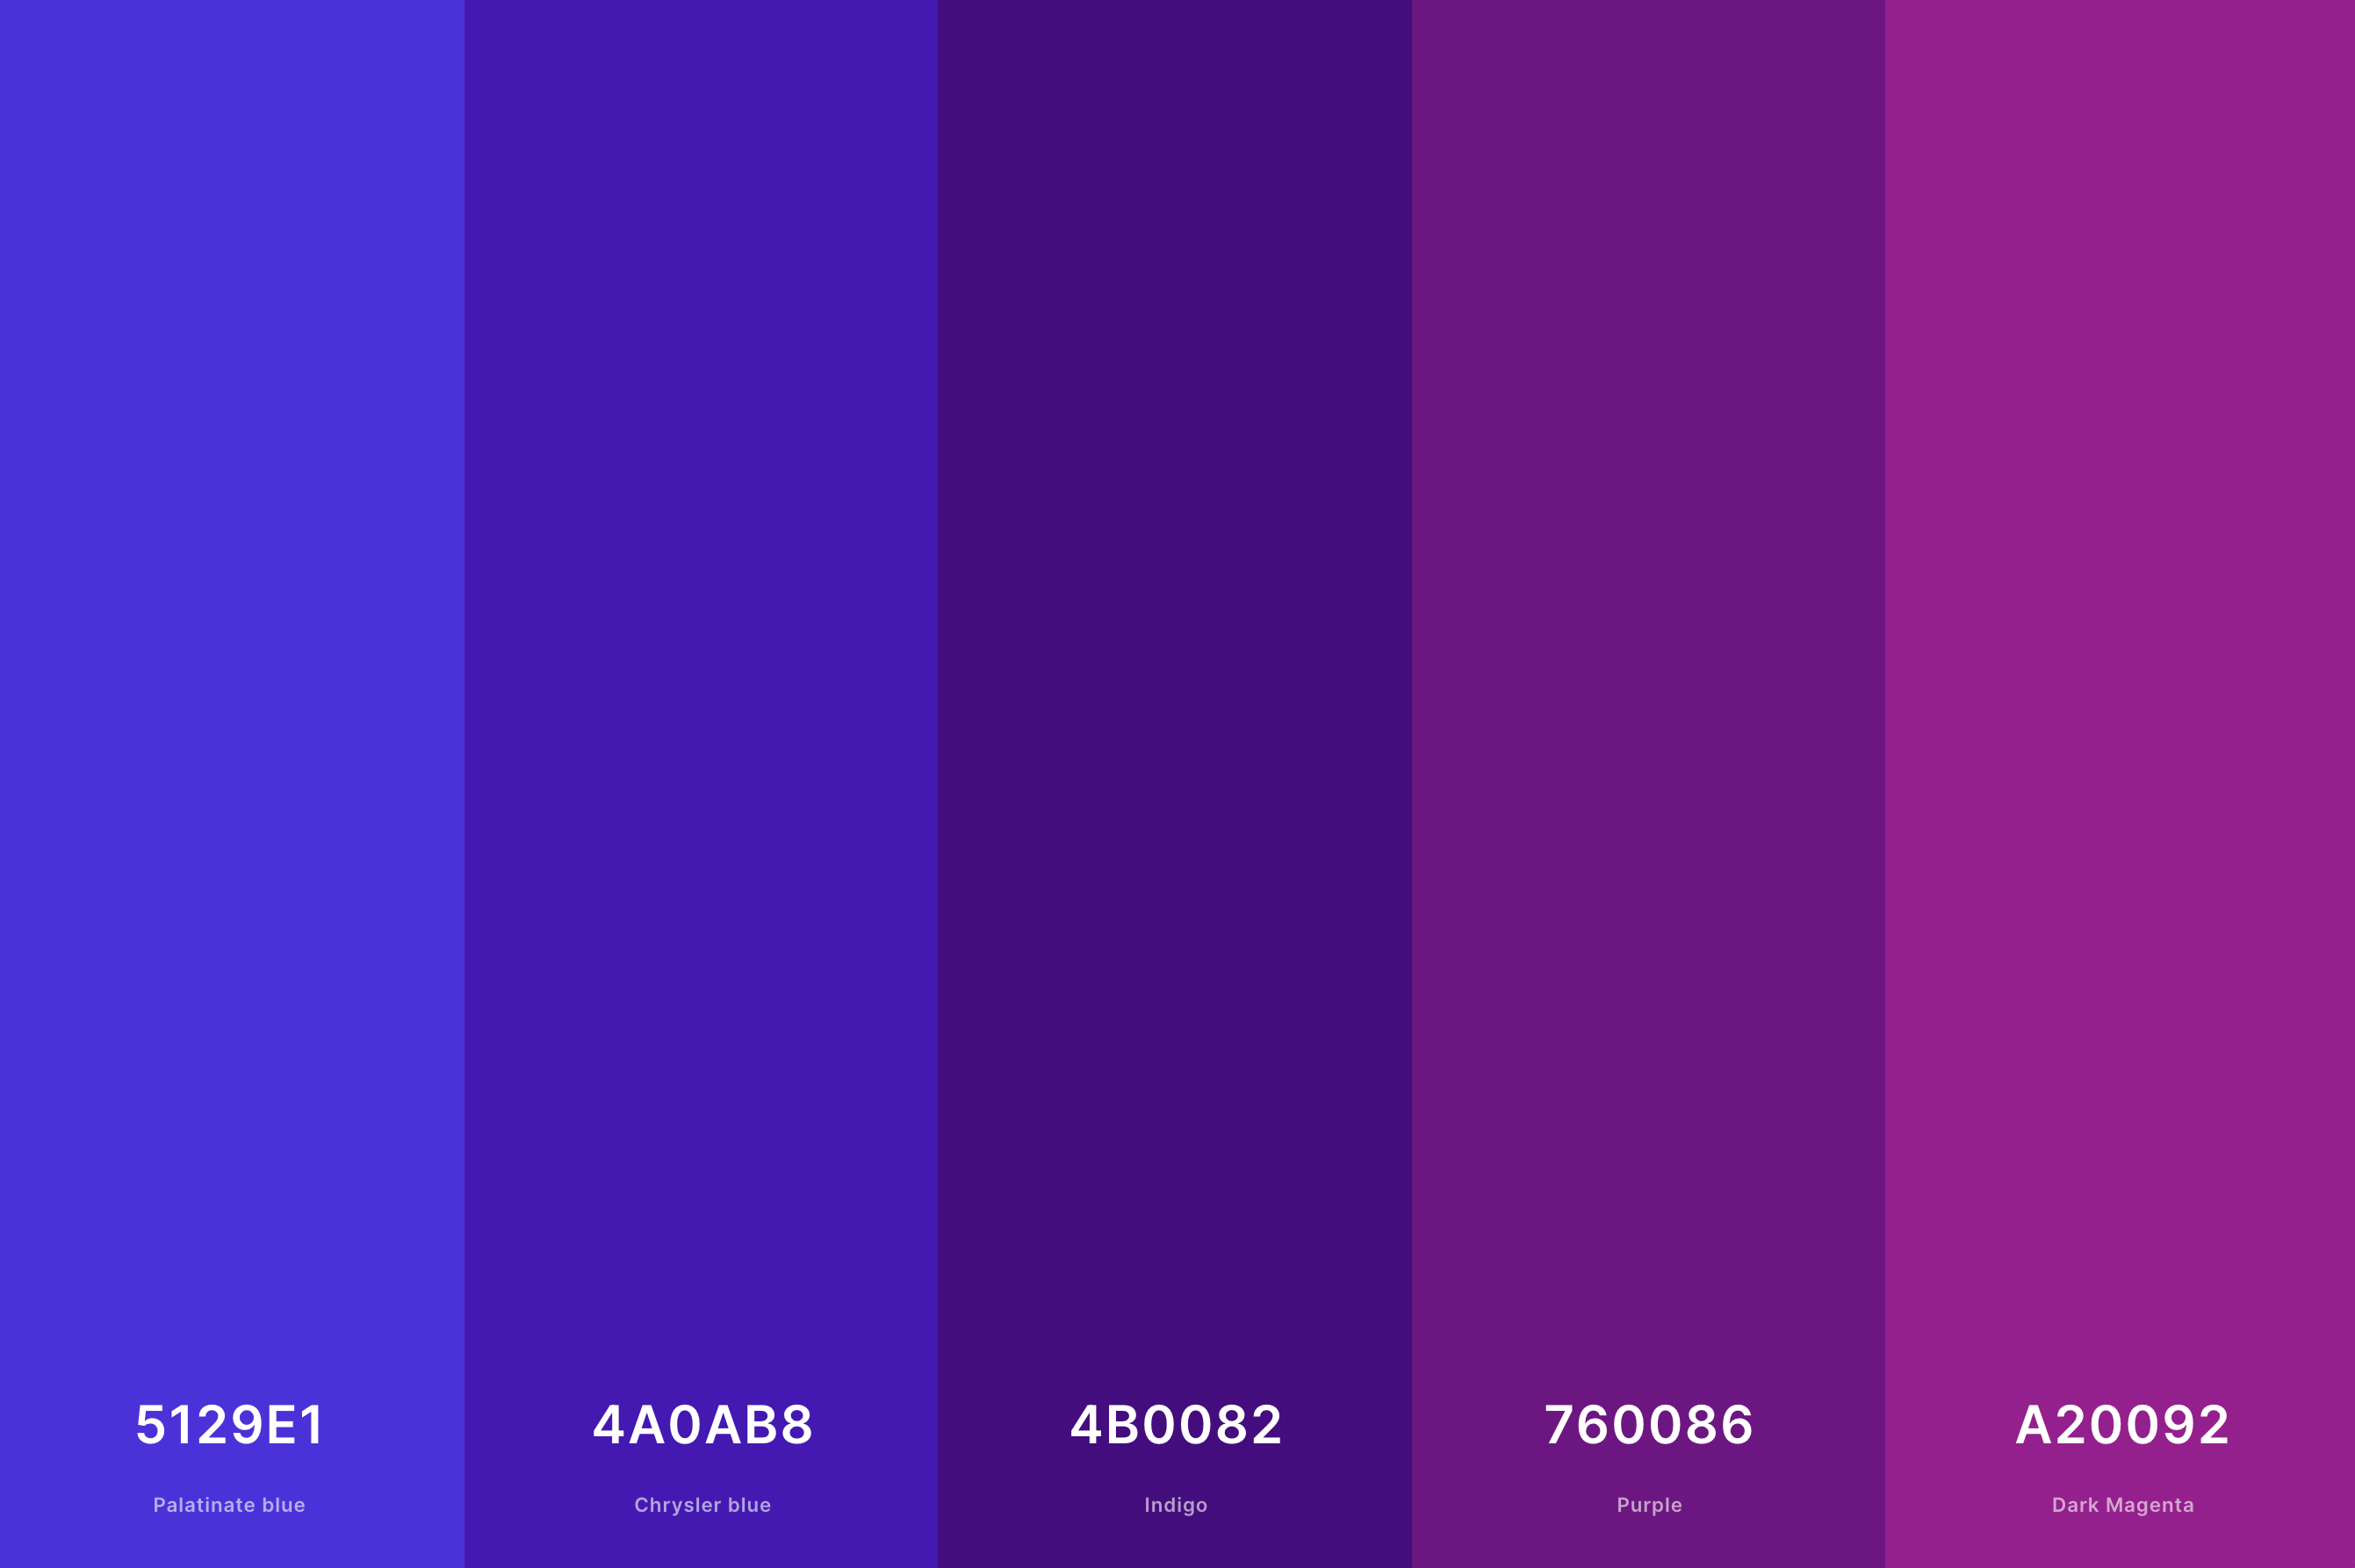 14. Indigo And Purple Color Palette Color Palette with Palatinate Blue (Hex #5129E1) + Chrysler Blue (Hex #4A0AB8) + Indigo (Hex #4B0082) + Purple (Hex #760086) + Dark Magenta (Hex #A20092) Color Palette with Hex Codes